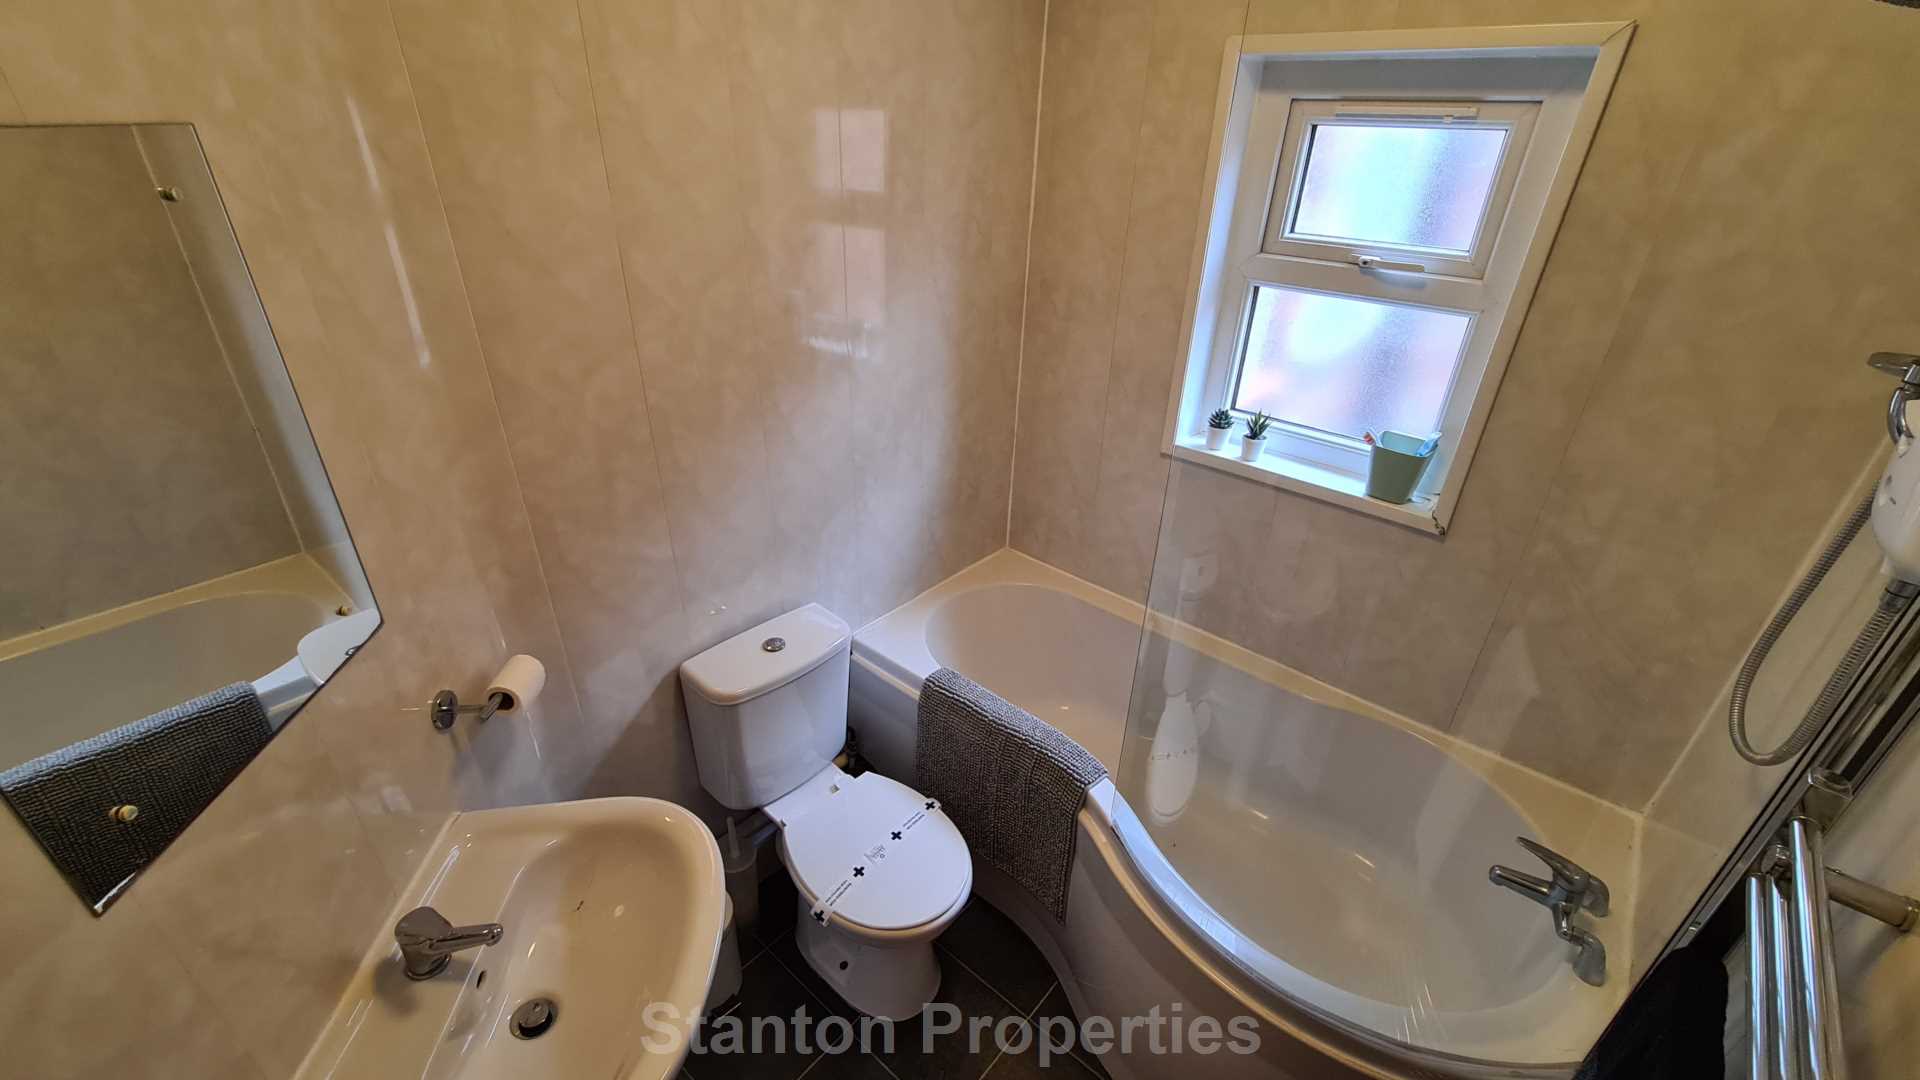 £130 pppw, See Video Tour, Mabfield Road, Fallowfield, Image 23